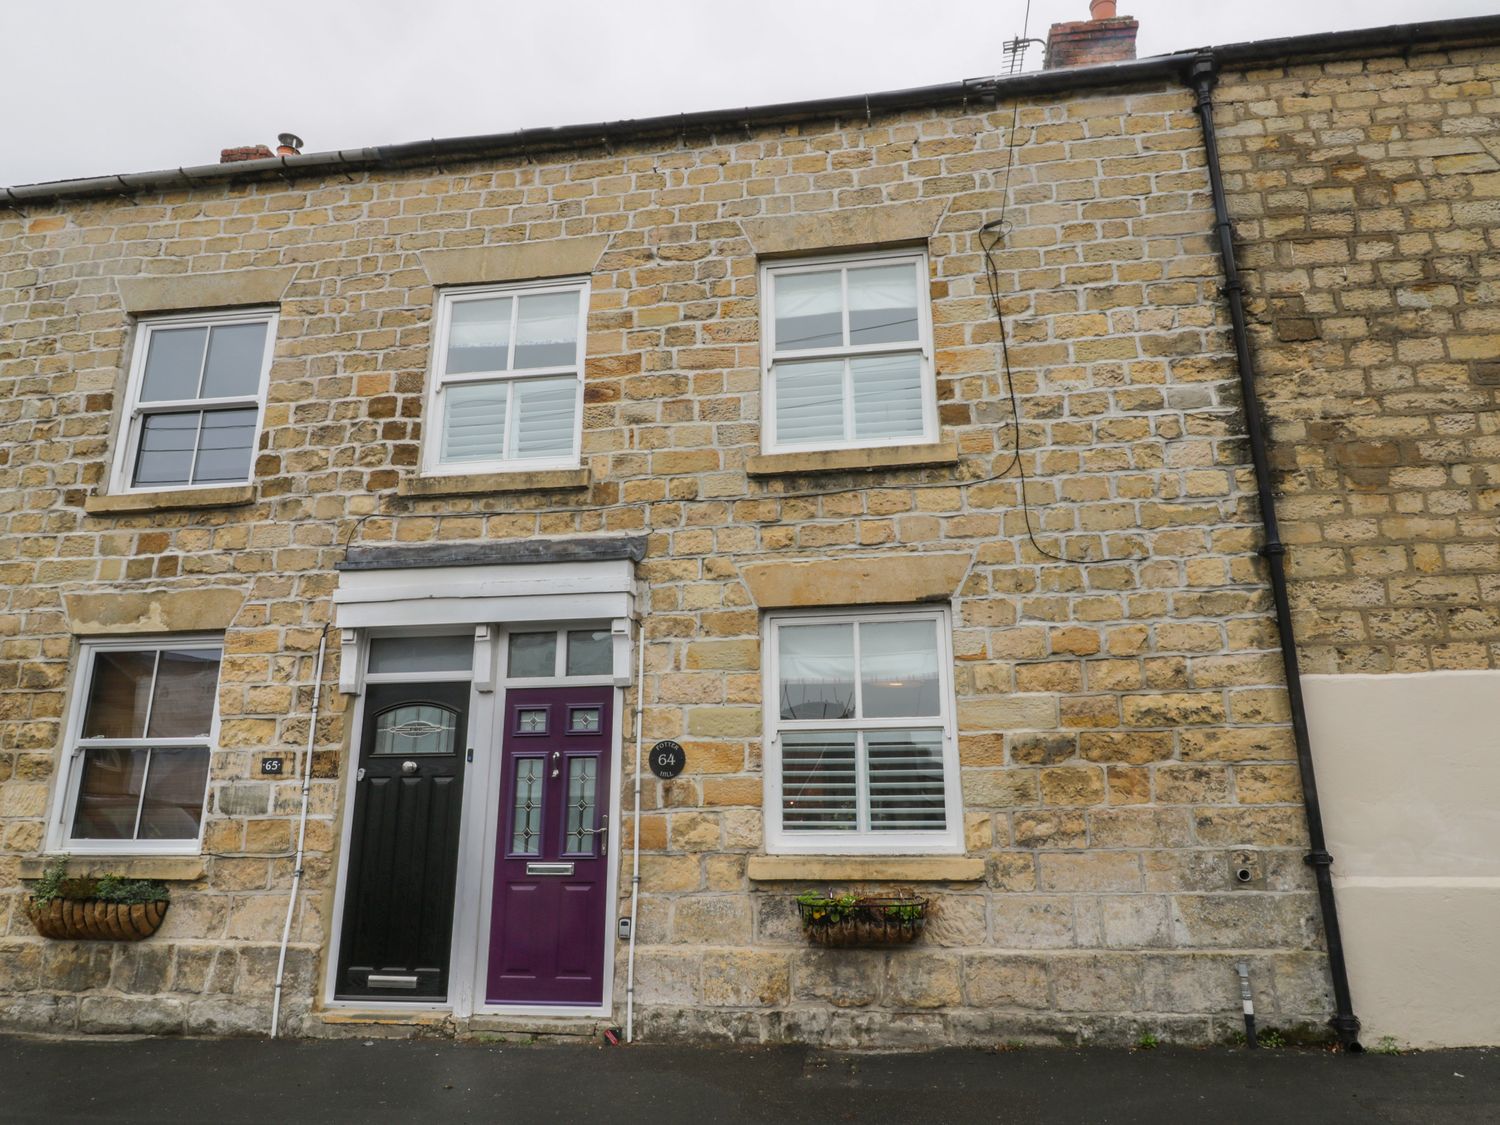 64 Potter Hill - North Yorkshire (incl. Whitby) - 1052614 - photo 1